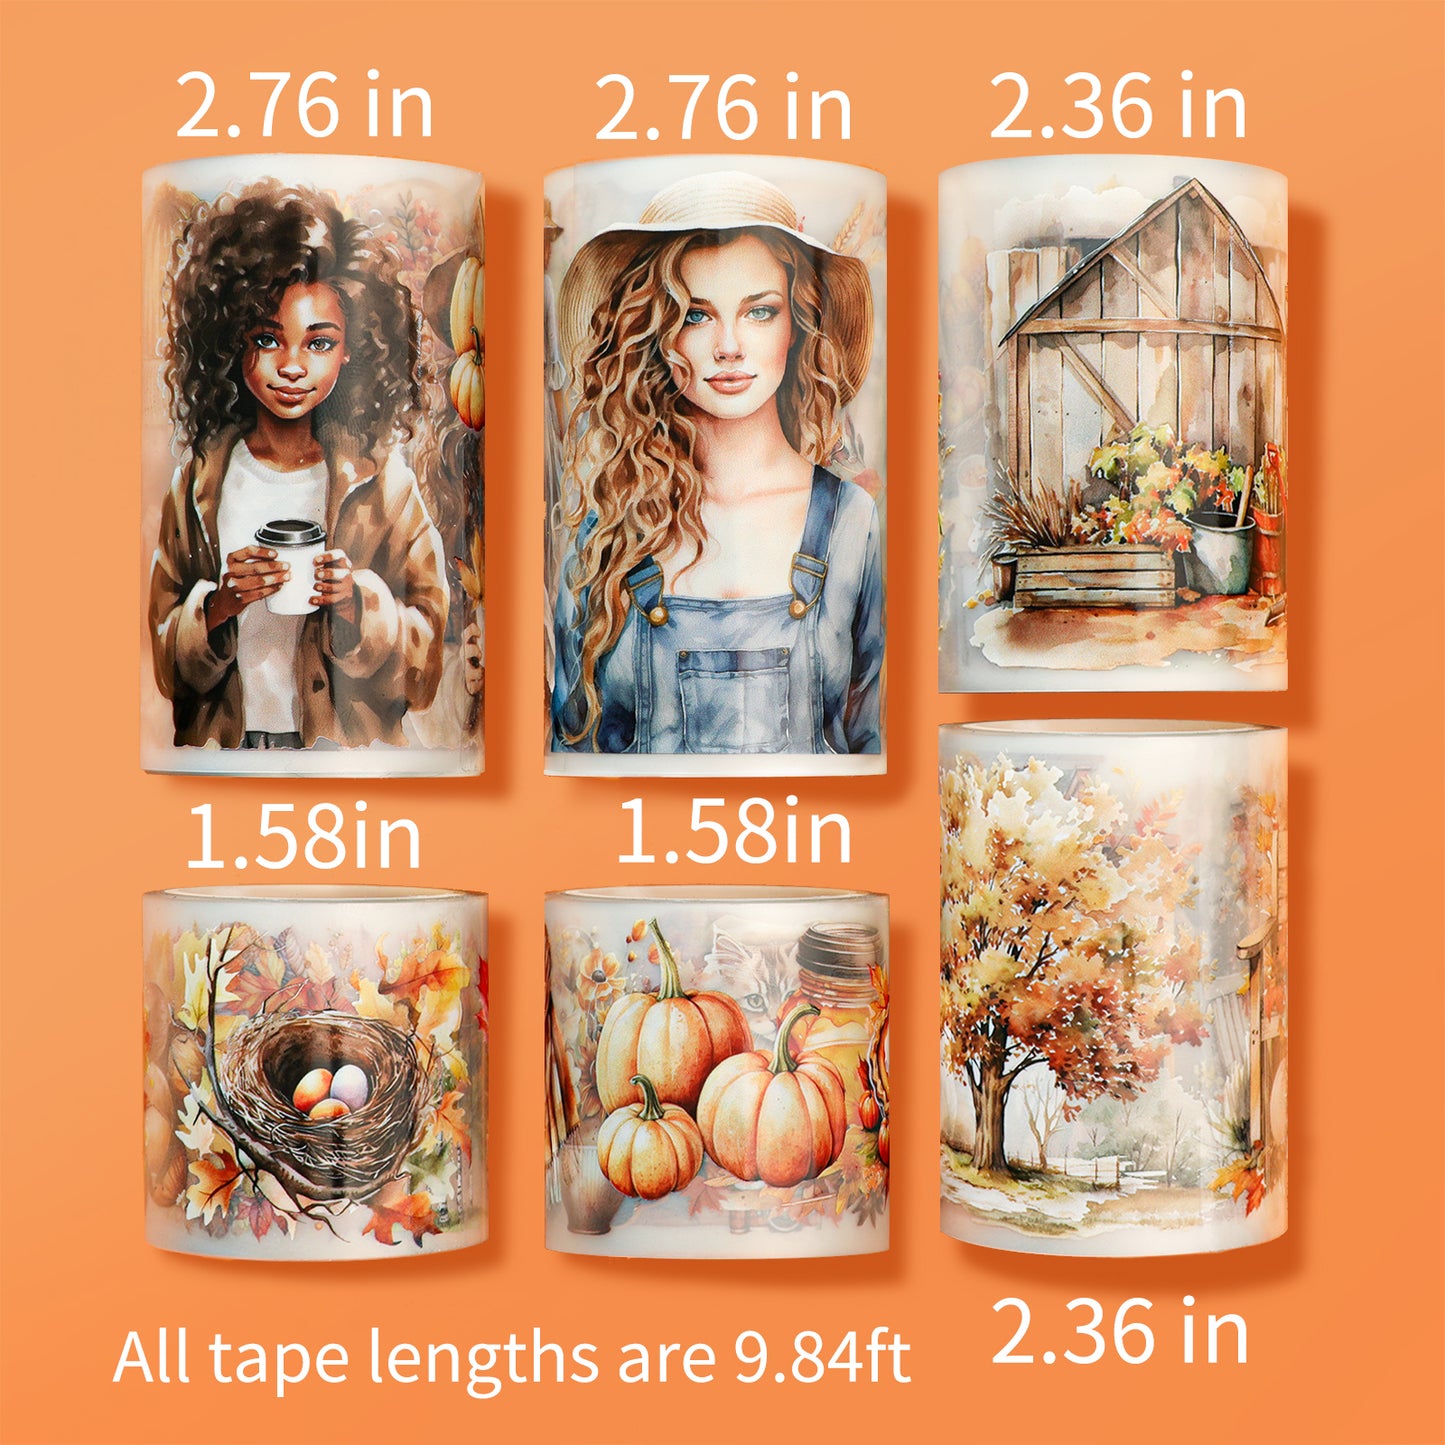 Cratey Fall PET Washi Tape Set for Journaling, Scrapbooking & Crafting. Cut & Use as Thanksgiving Harvest Decorative Stickers in Your Junk Journals, Crafts, or Planners